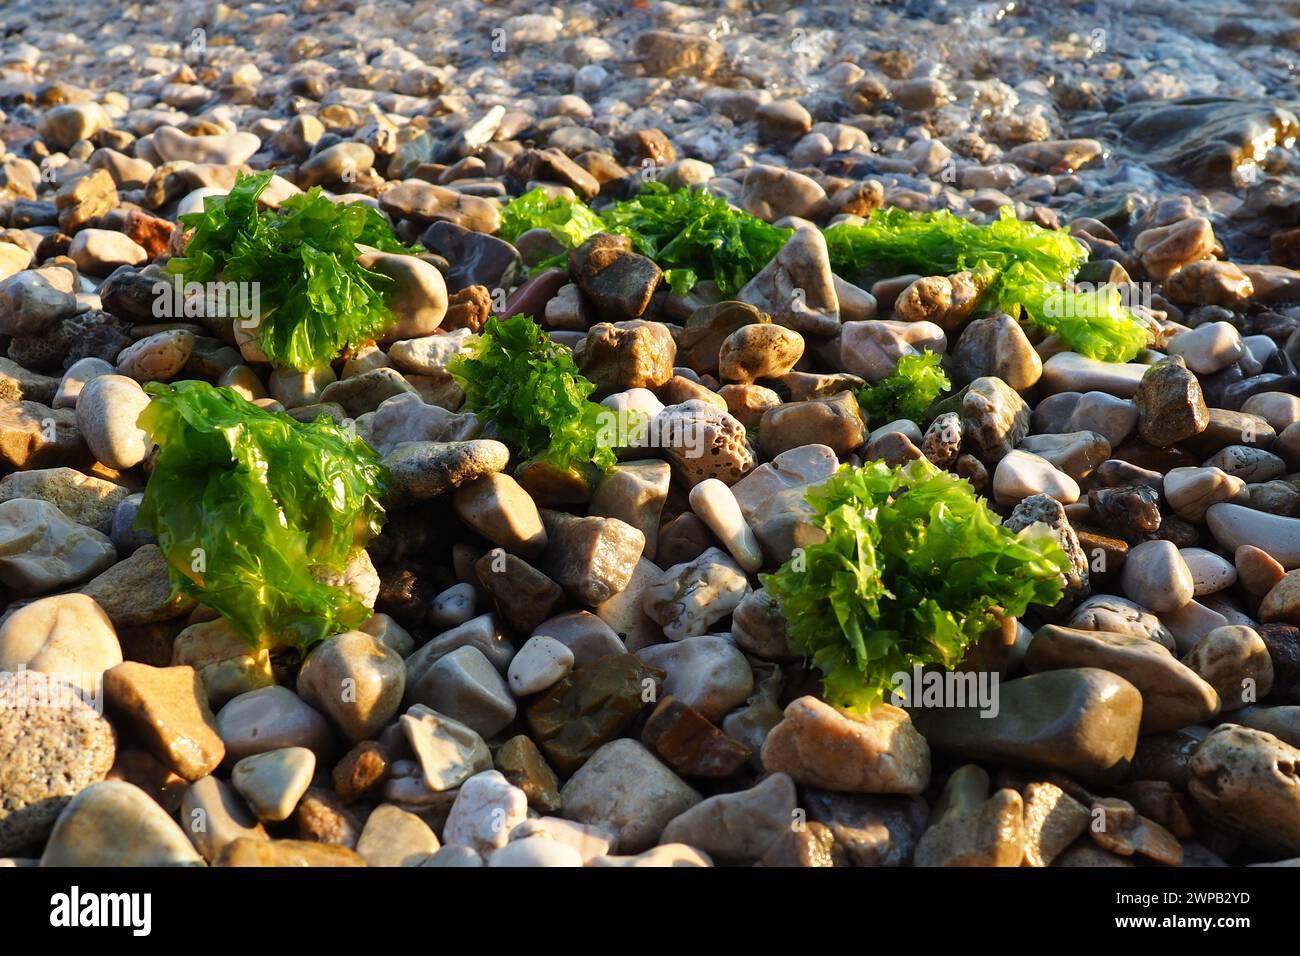 Ulva, a genus of marine green algae of the Ulvaceae family. Many species are edible sea lettuce. Algae are thrown onto the pebbles by a wave Stock Photo